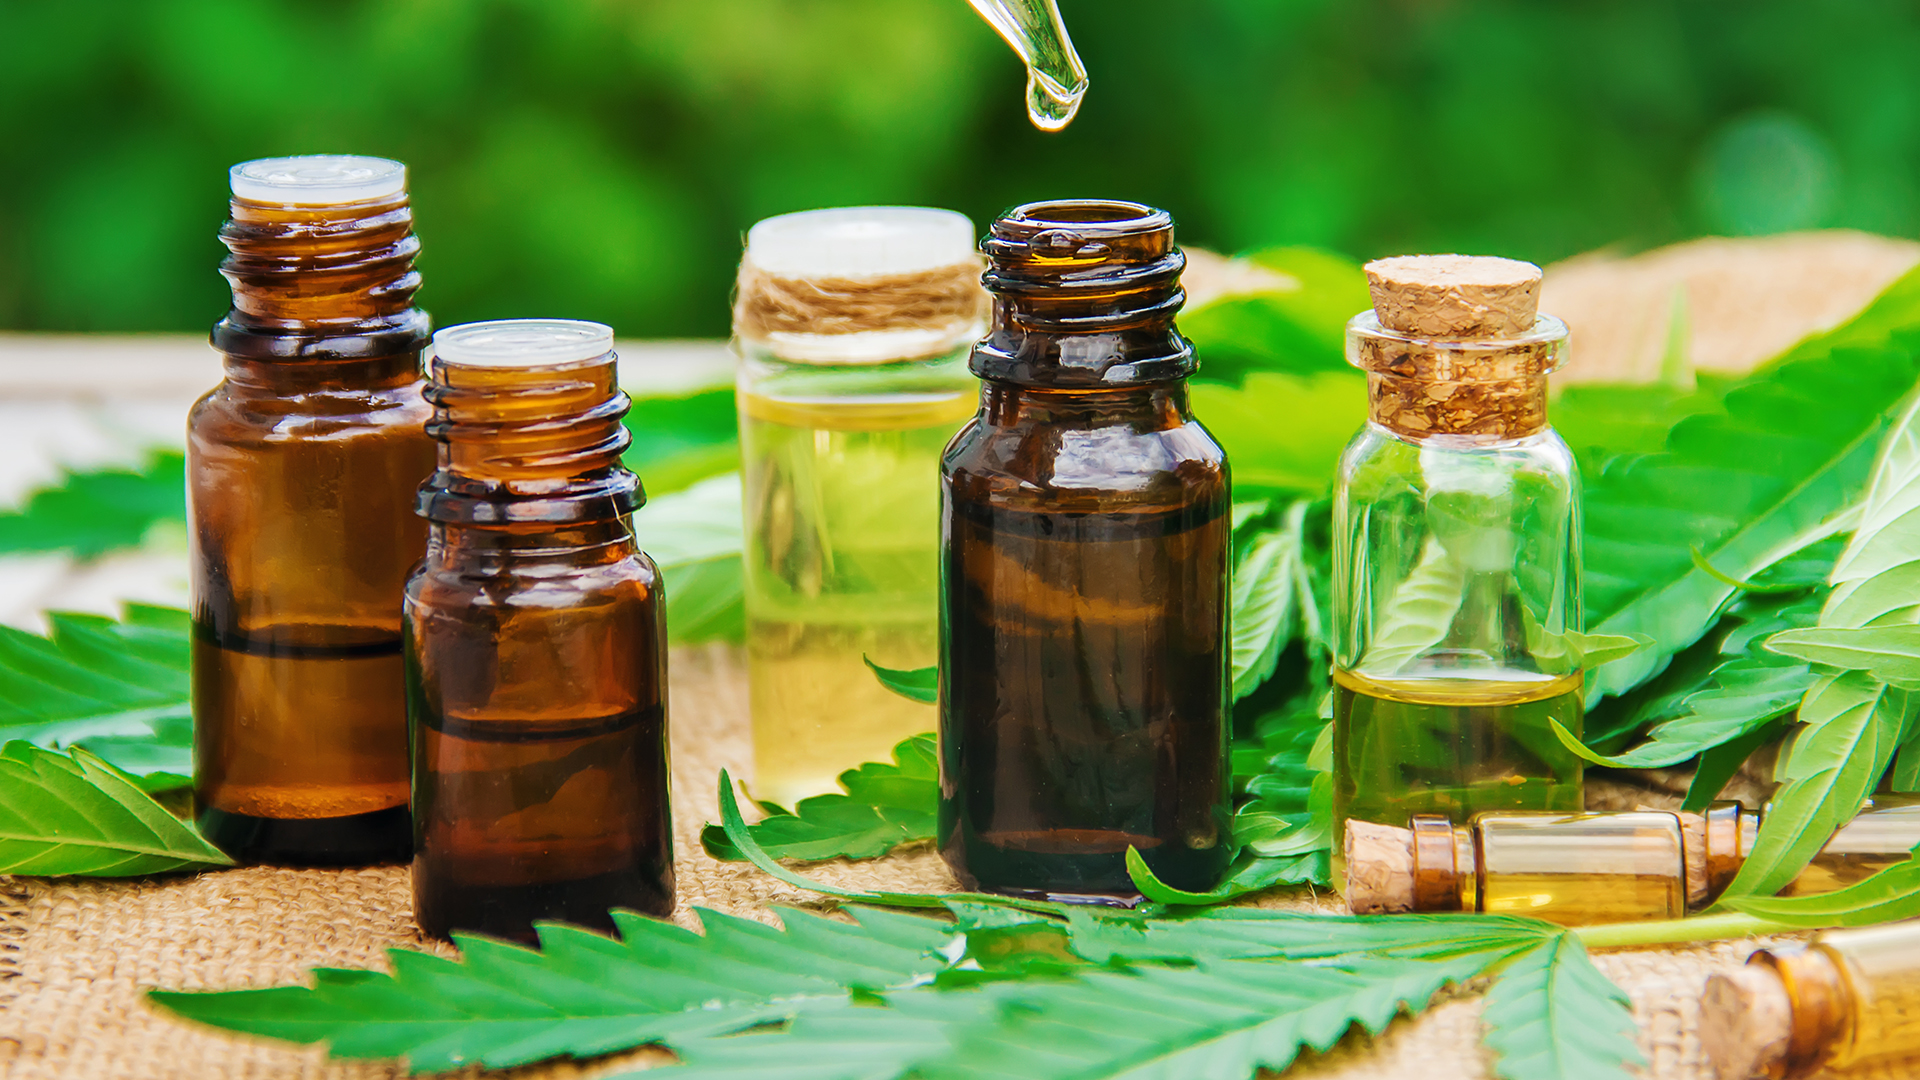 How much do CBD products cost?